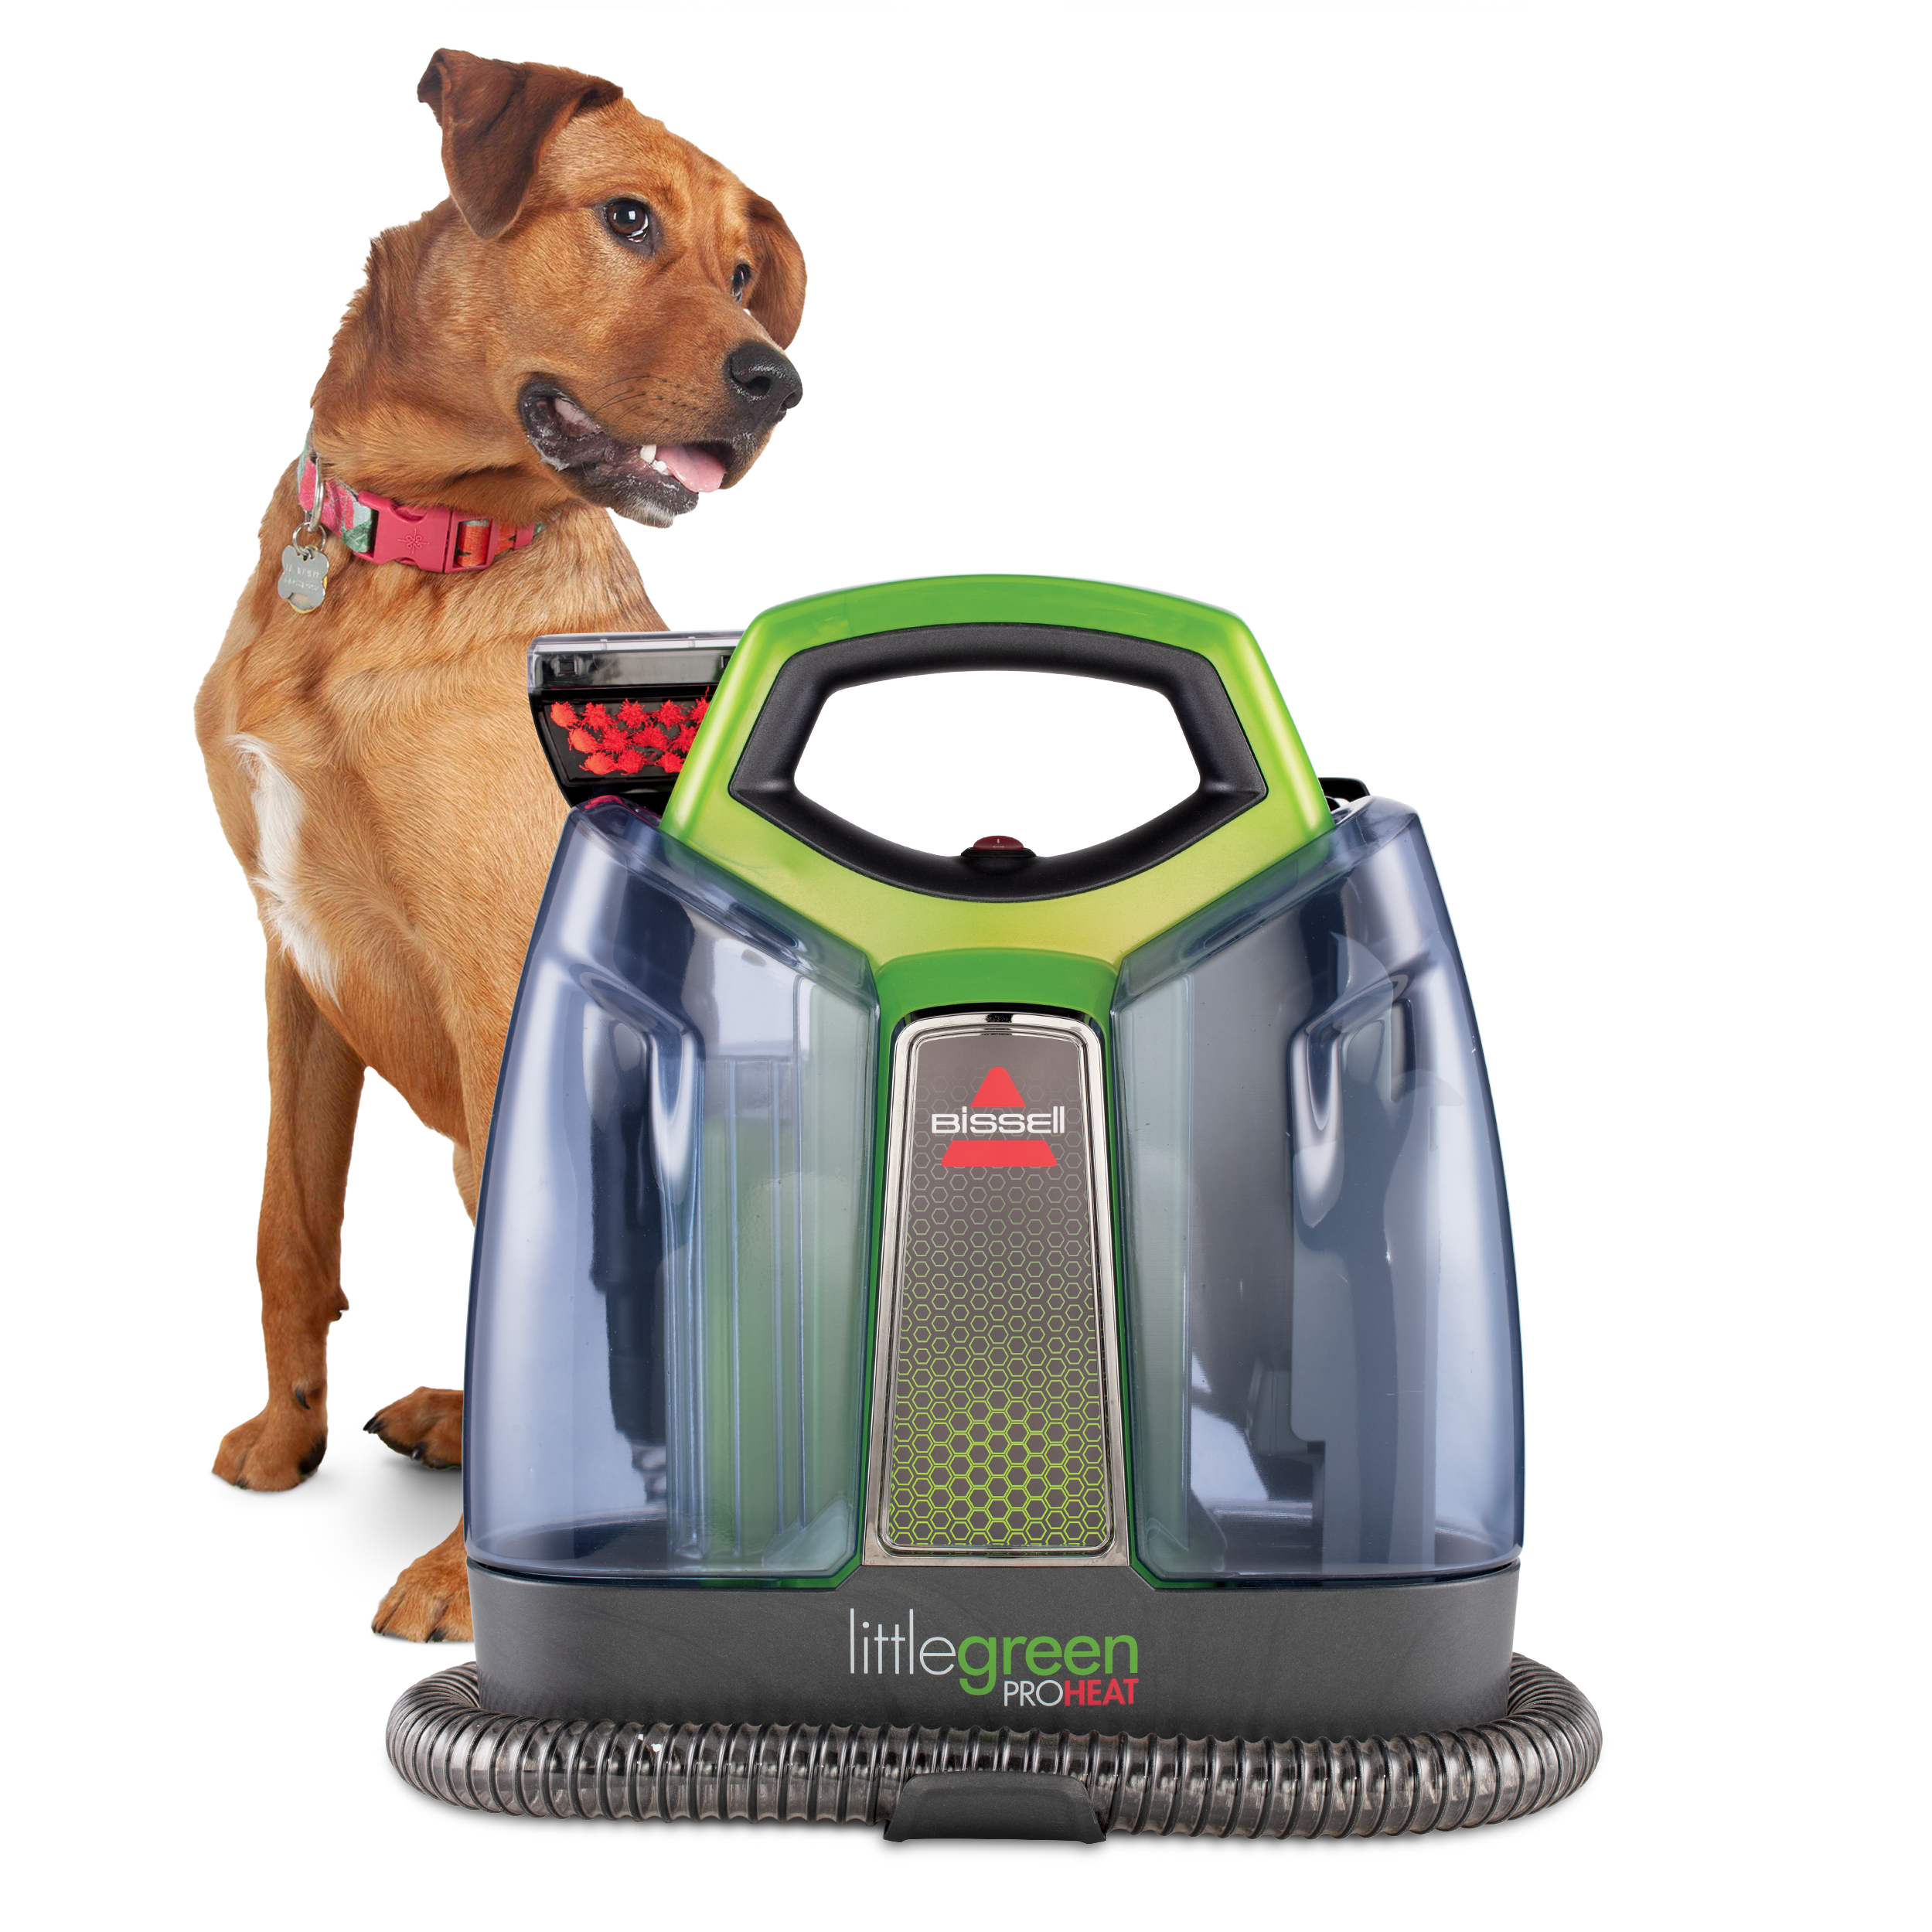 BISSELL LITTLE GREEN PRO-HEAT PET CARPET CLEANER Mode:1425-W "REPLACEMENT PARTS" 